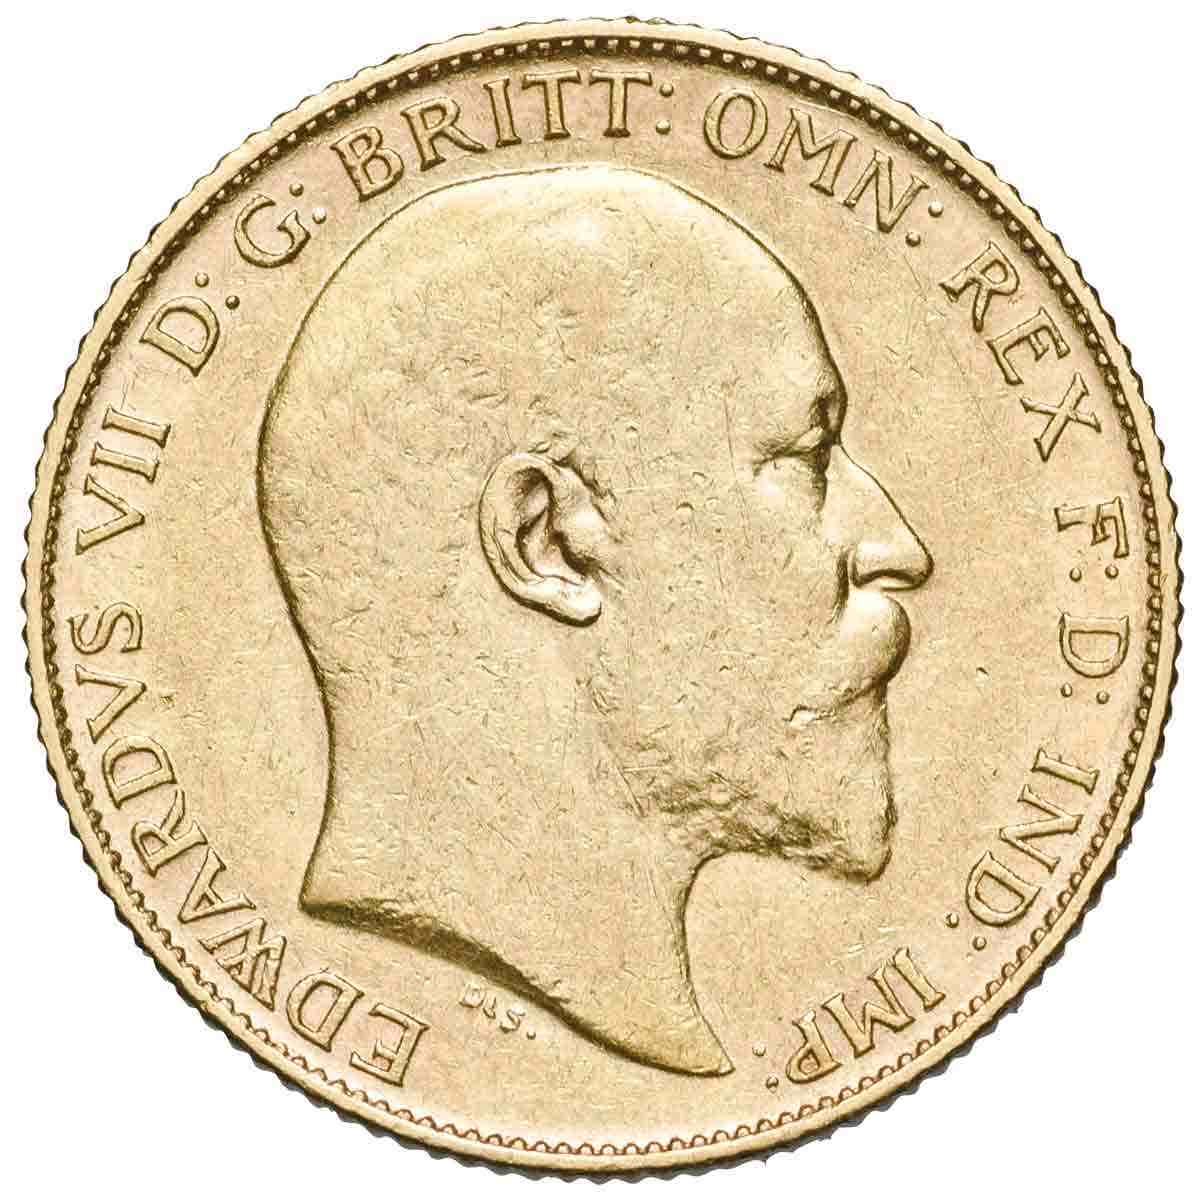 King Edward VII 1904P Gold Half Sovereign about Very Fine